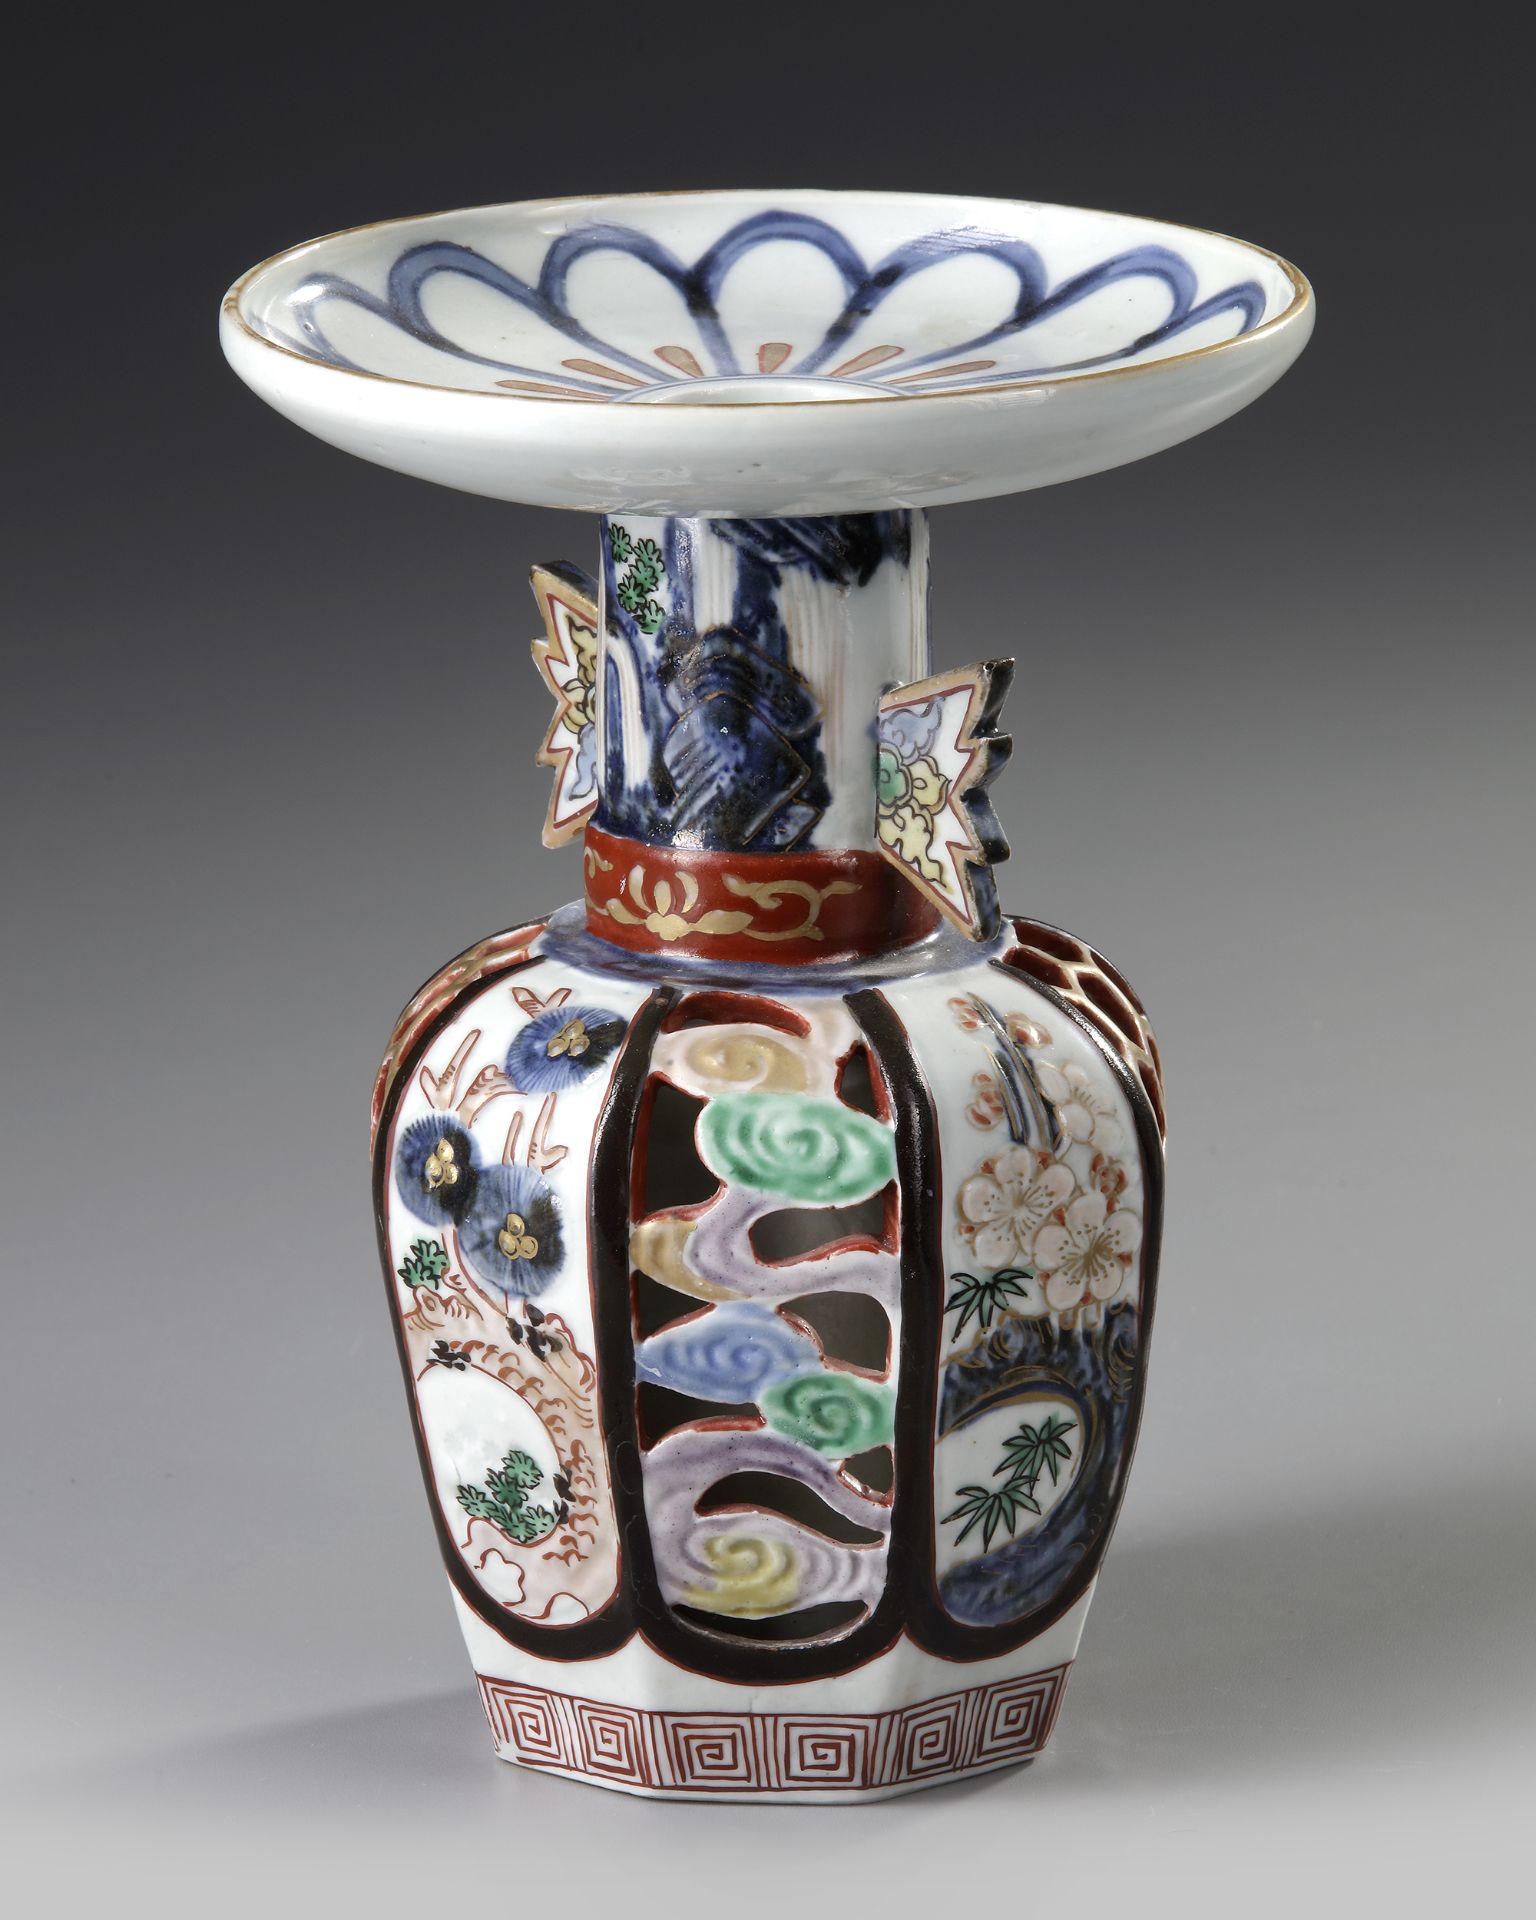 A JAPANESE IMARI DOUBLE-WALLED RETICULATED VASE, 17TH CENTURY